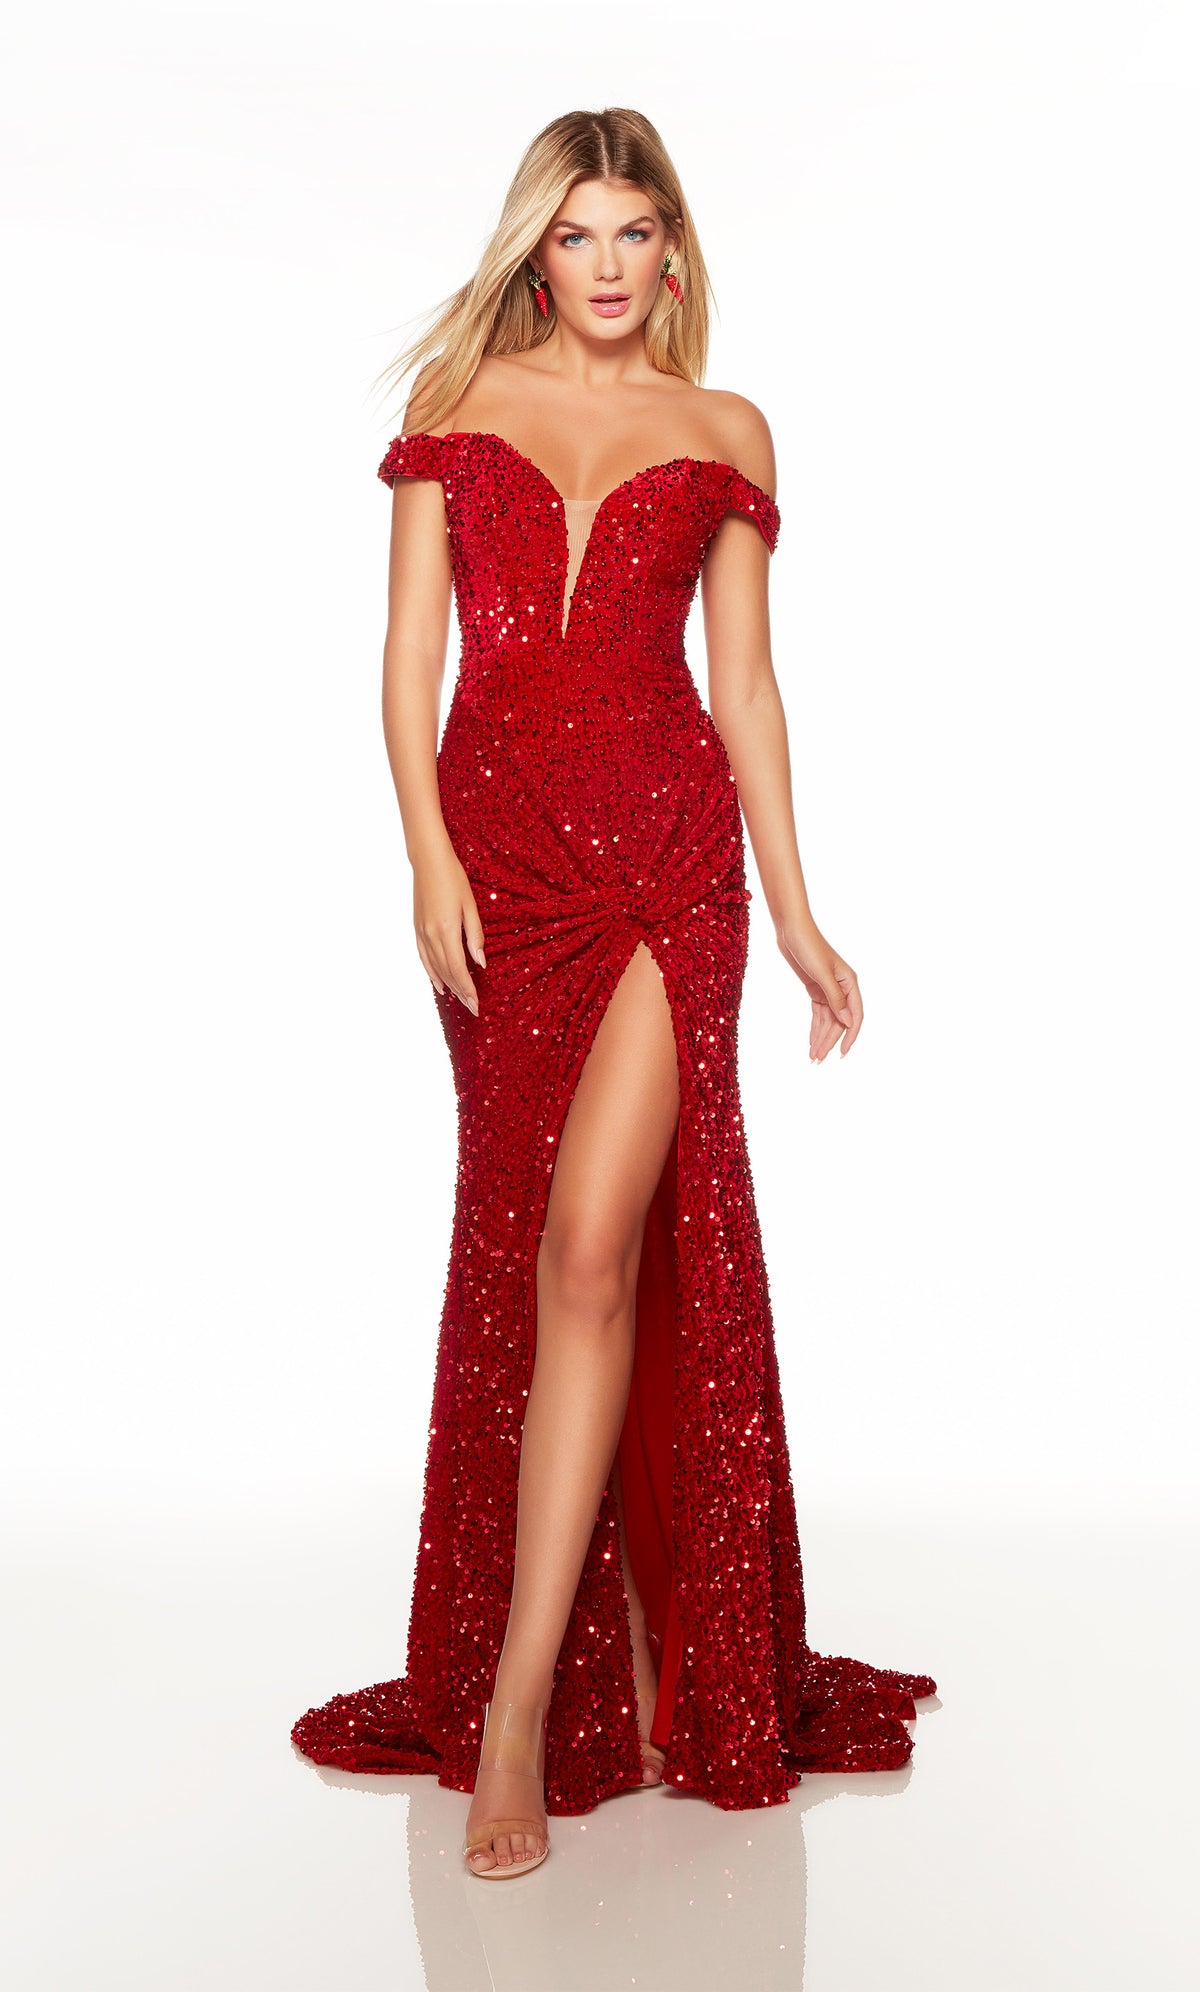 Red off the shoulder prom dress with a lace up back and train.